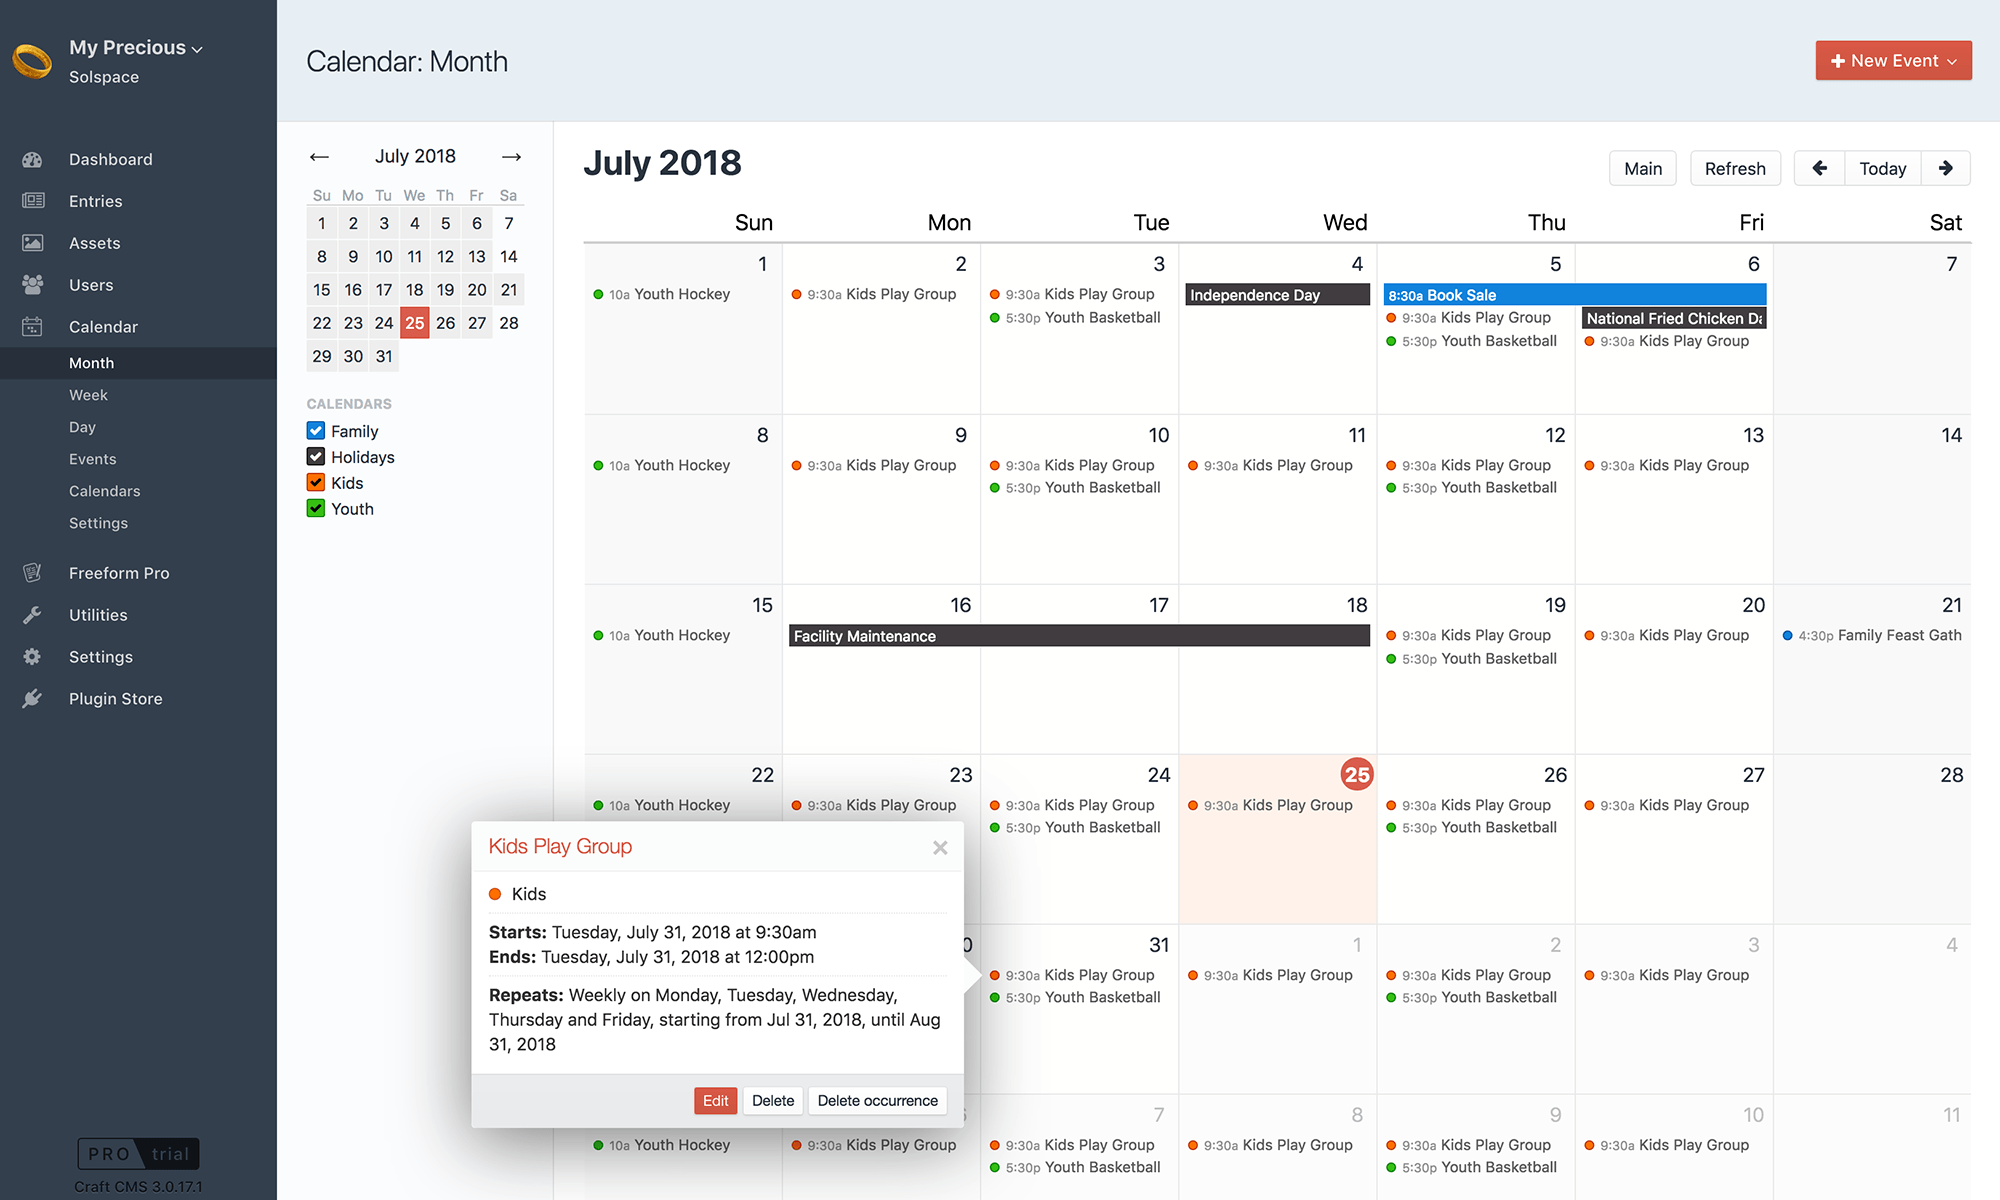 Add, edit, move, delete events within intuitive Month/Week/Day views for easier management of events.